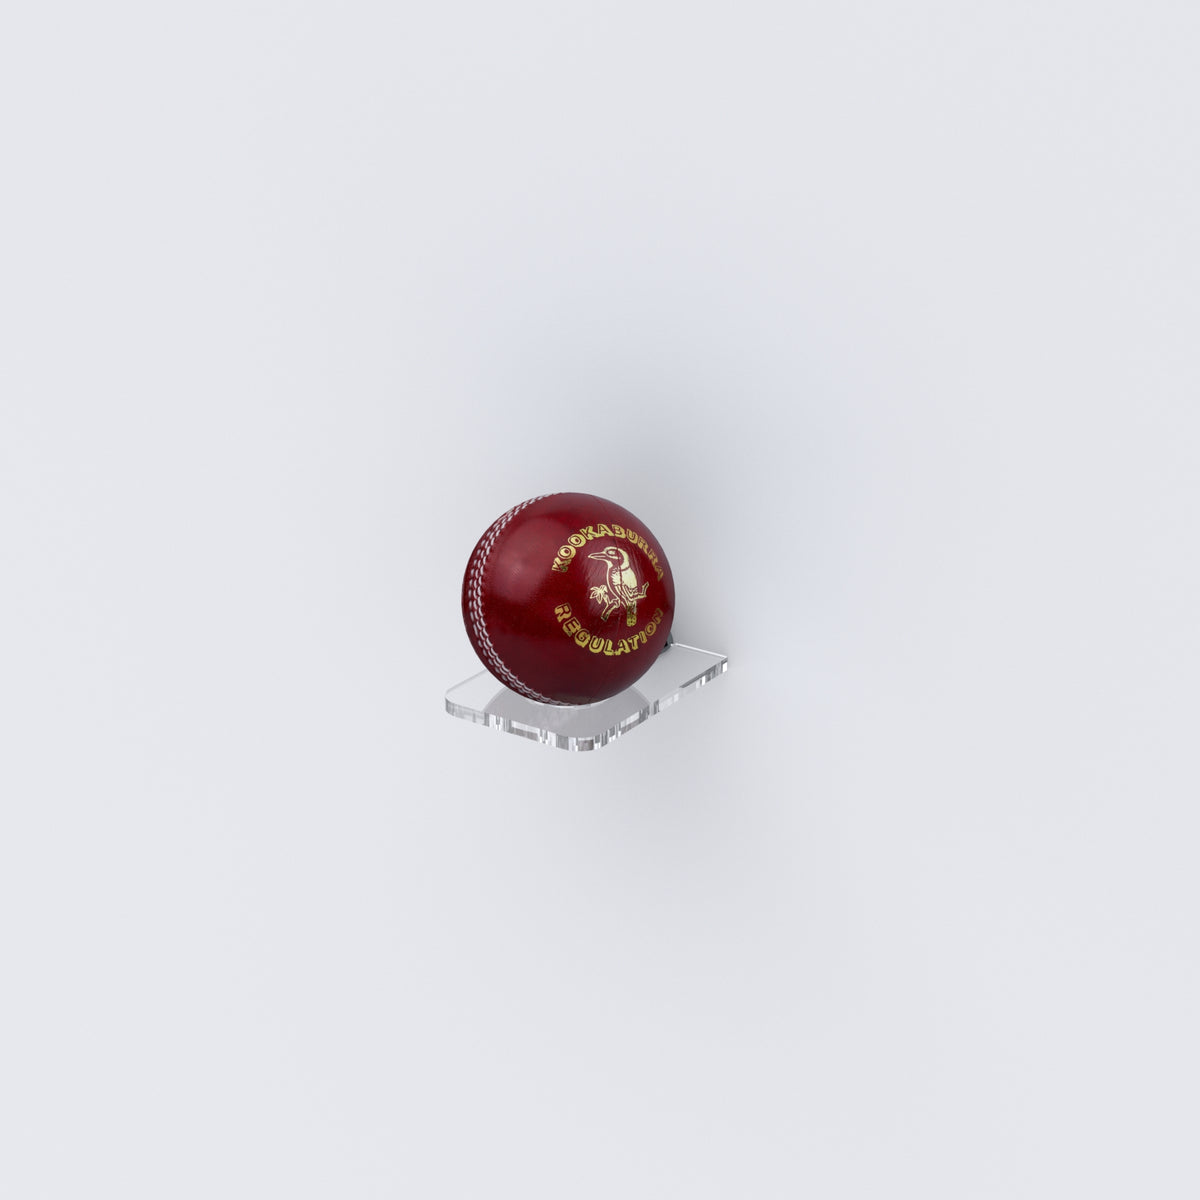 Wall Mounted Cricket Ball Display Stand / PM-11